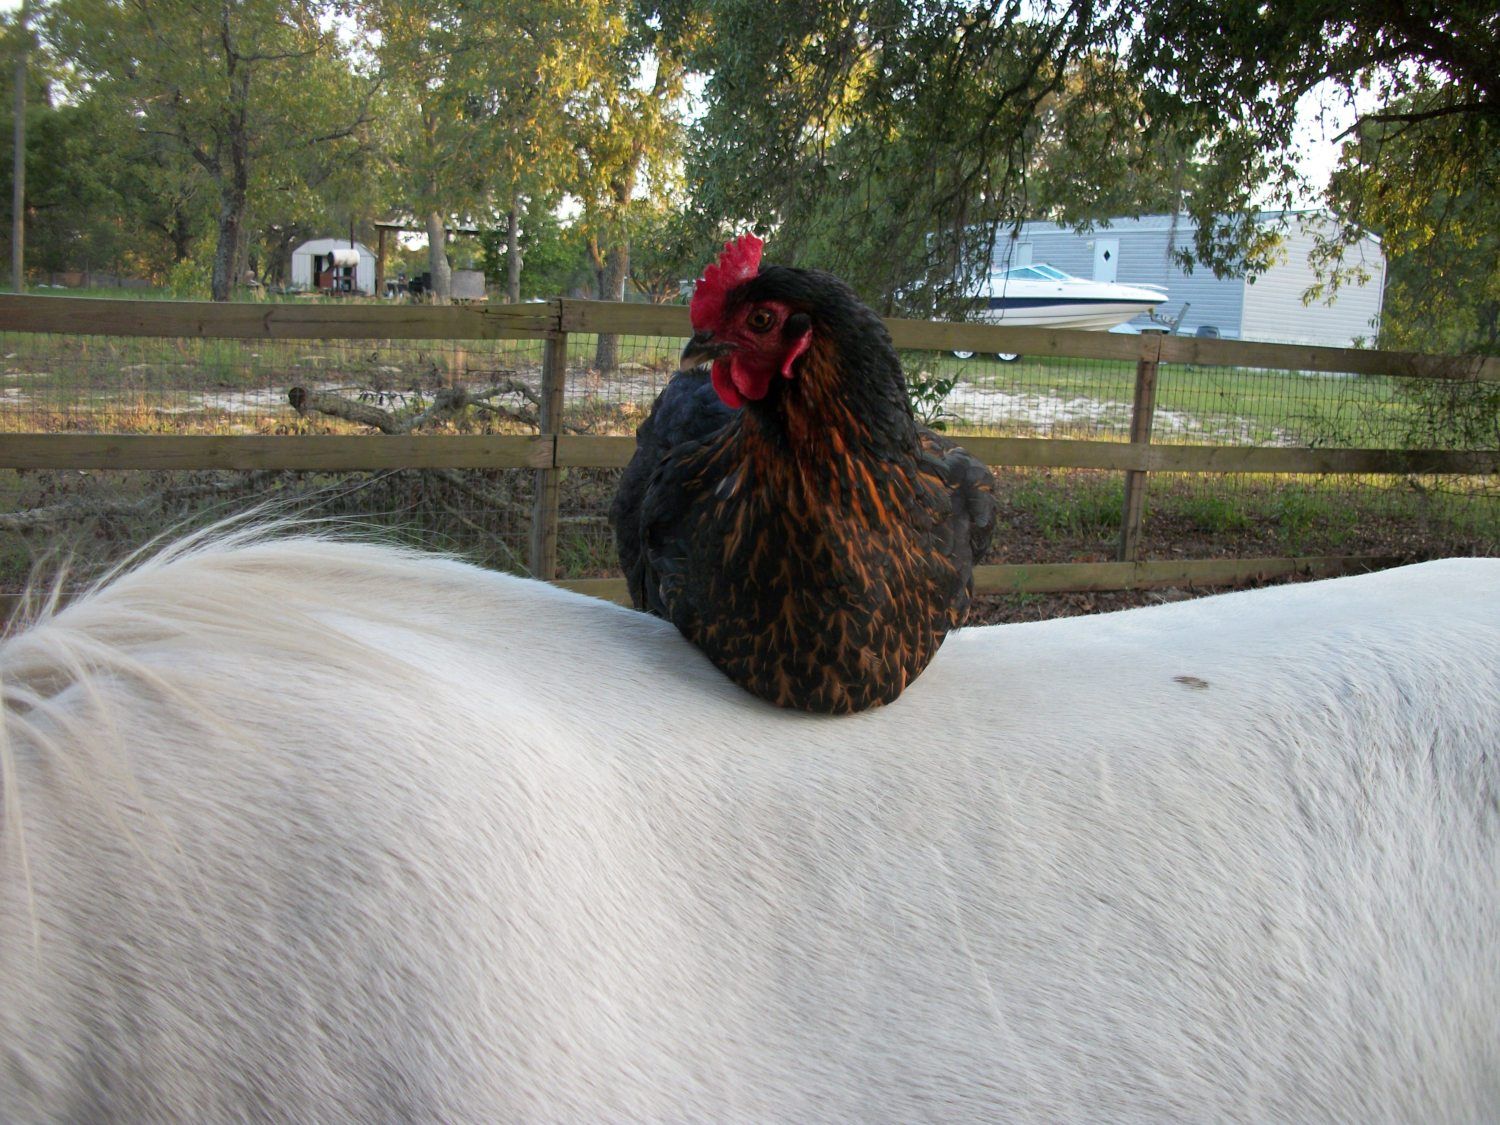 Horse And Chicken